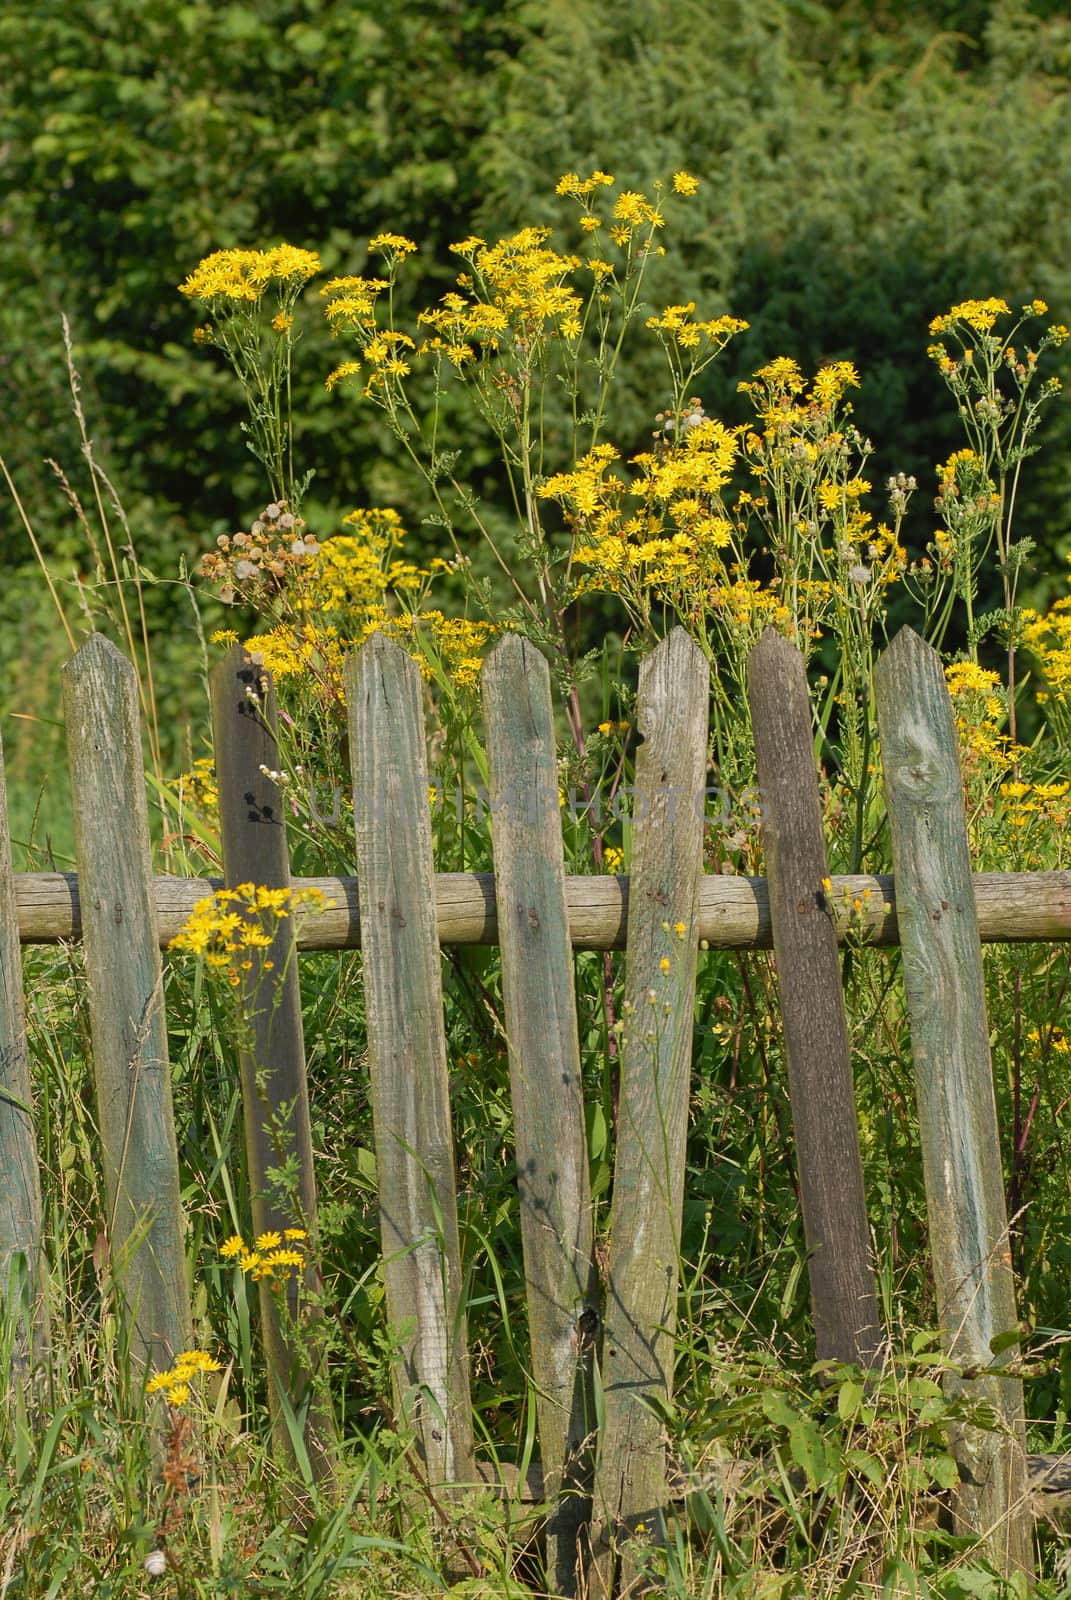 Countryside detail. An old wooden fence with yellow flowers behind. Sunny day in Europe.